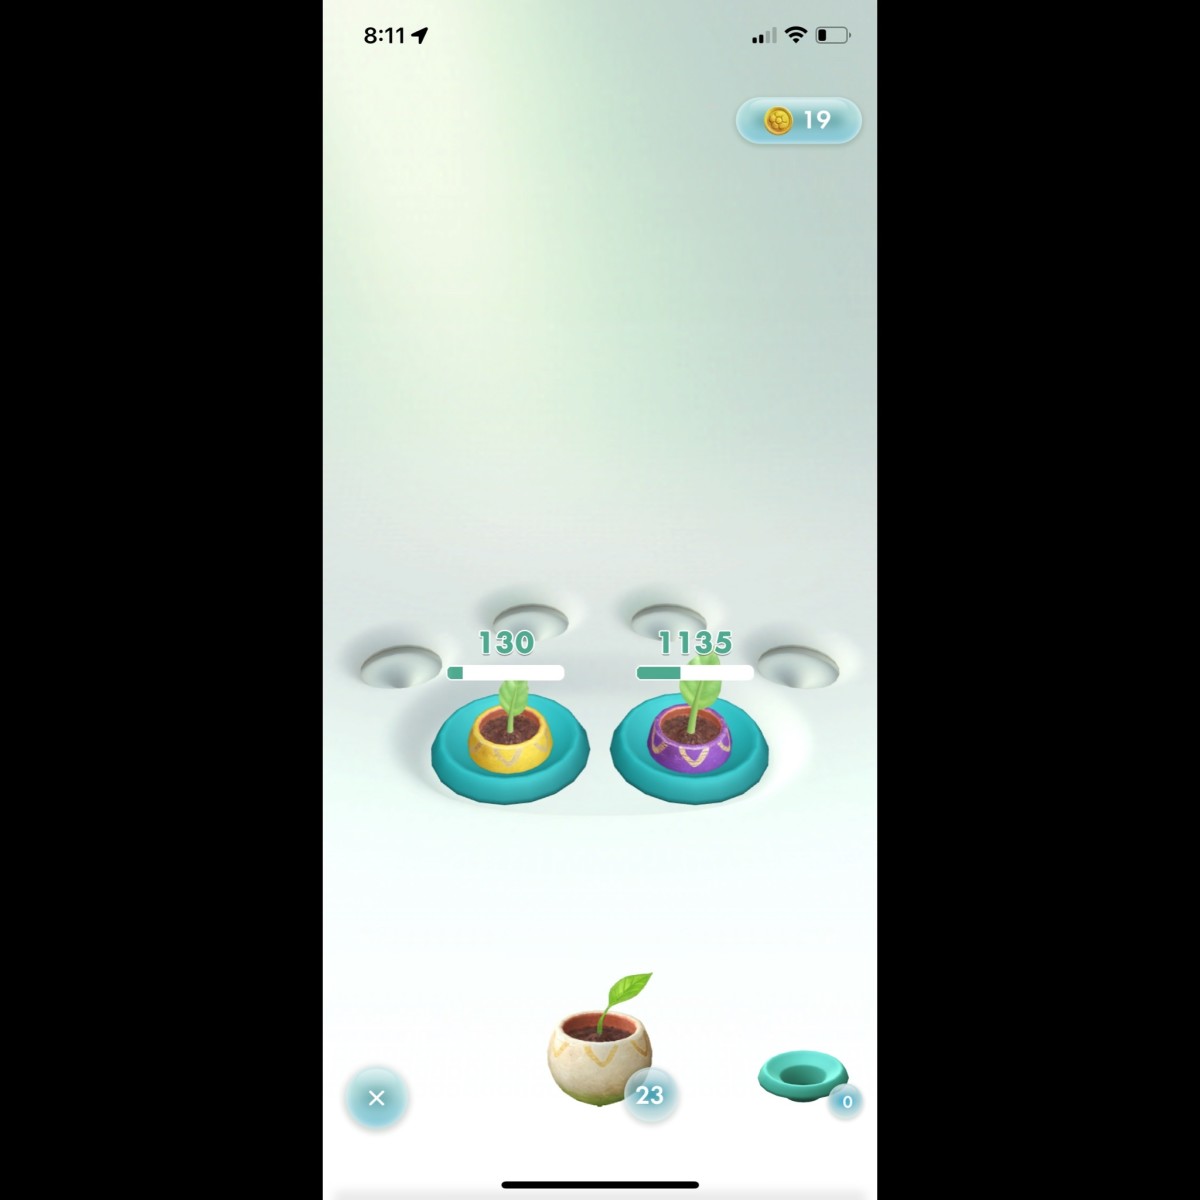 You grow your seedlings on this screen in the game. Once a seedling has grown, it turns into a Pikmin creature.